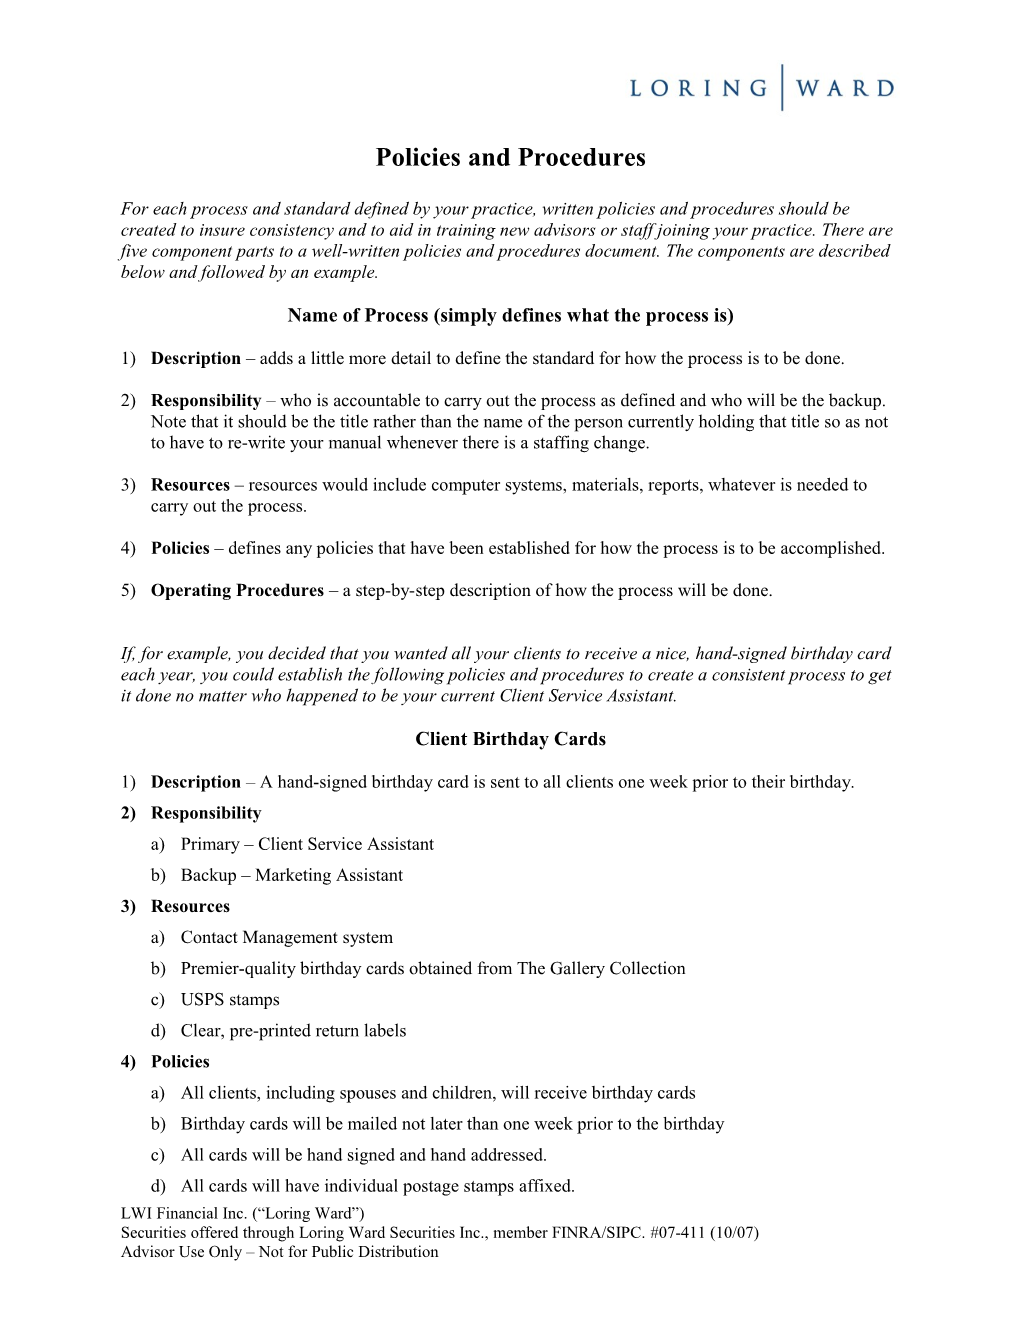 Guide to Establishing Policies and Procedures